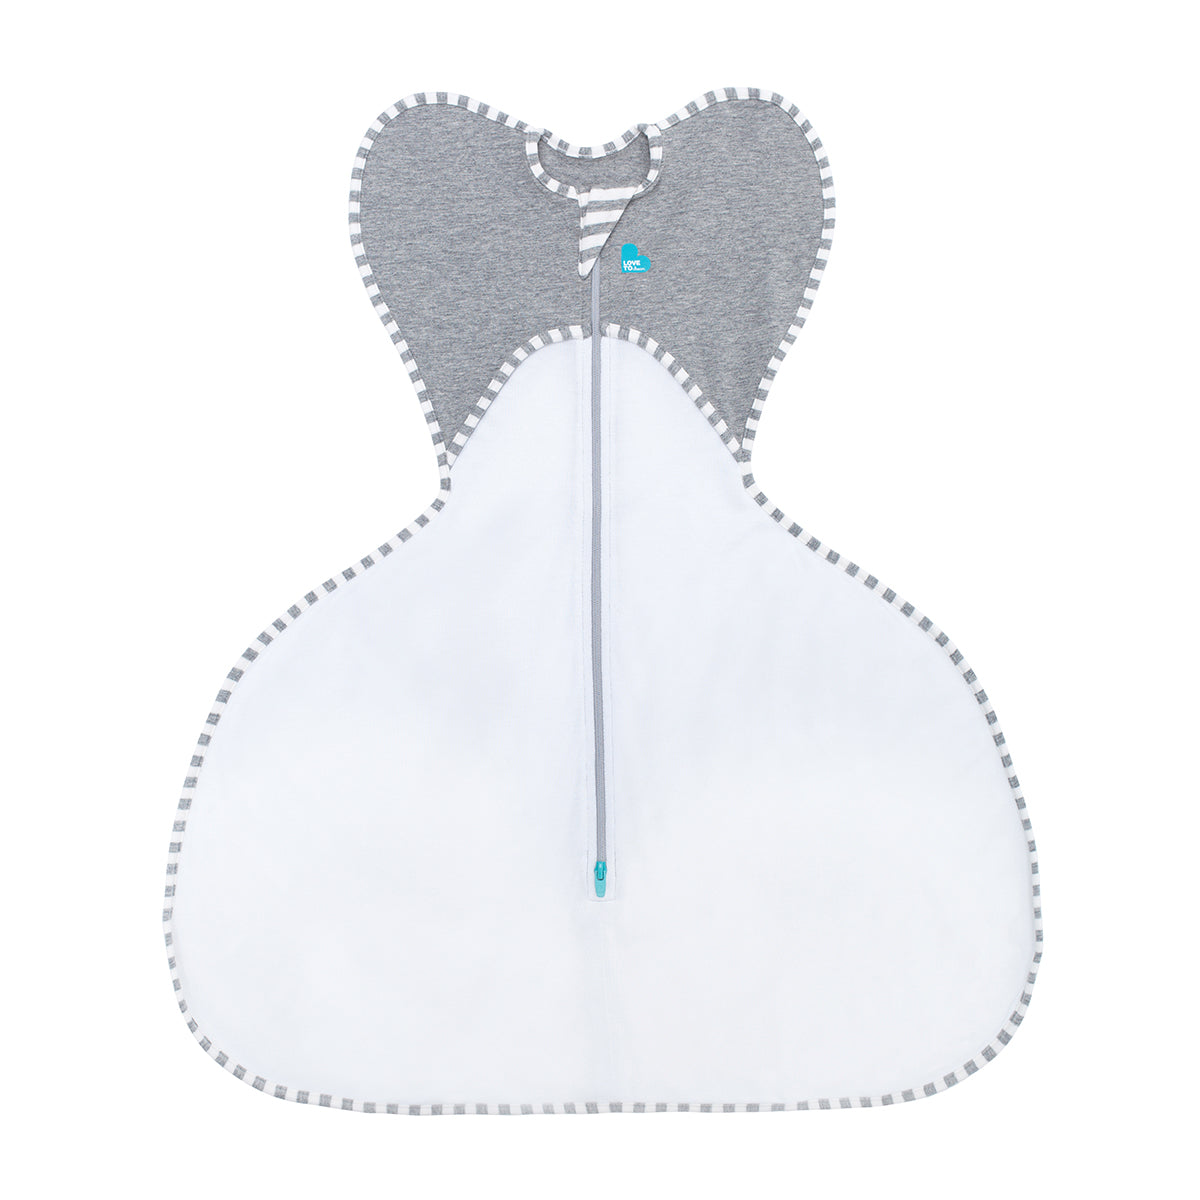 The patented Love to Dream™ swaddle has been adapted to be suitable for a hip harness, for babies who are being treated for Hip Dysplasia. Certified by the International Hip Dysplasia Institute, the Swaddle Up™ Hip Harness Swaddle is the only zip-up swaddle with patented “wings”, for a natural Arms Up™ position.